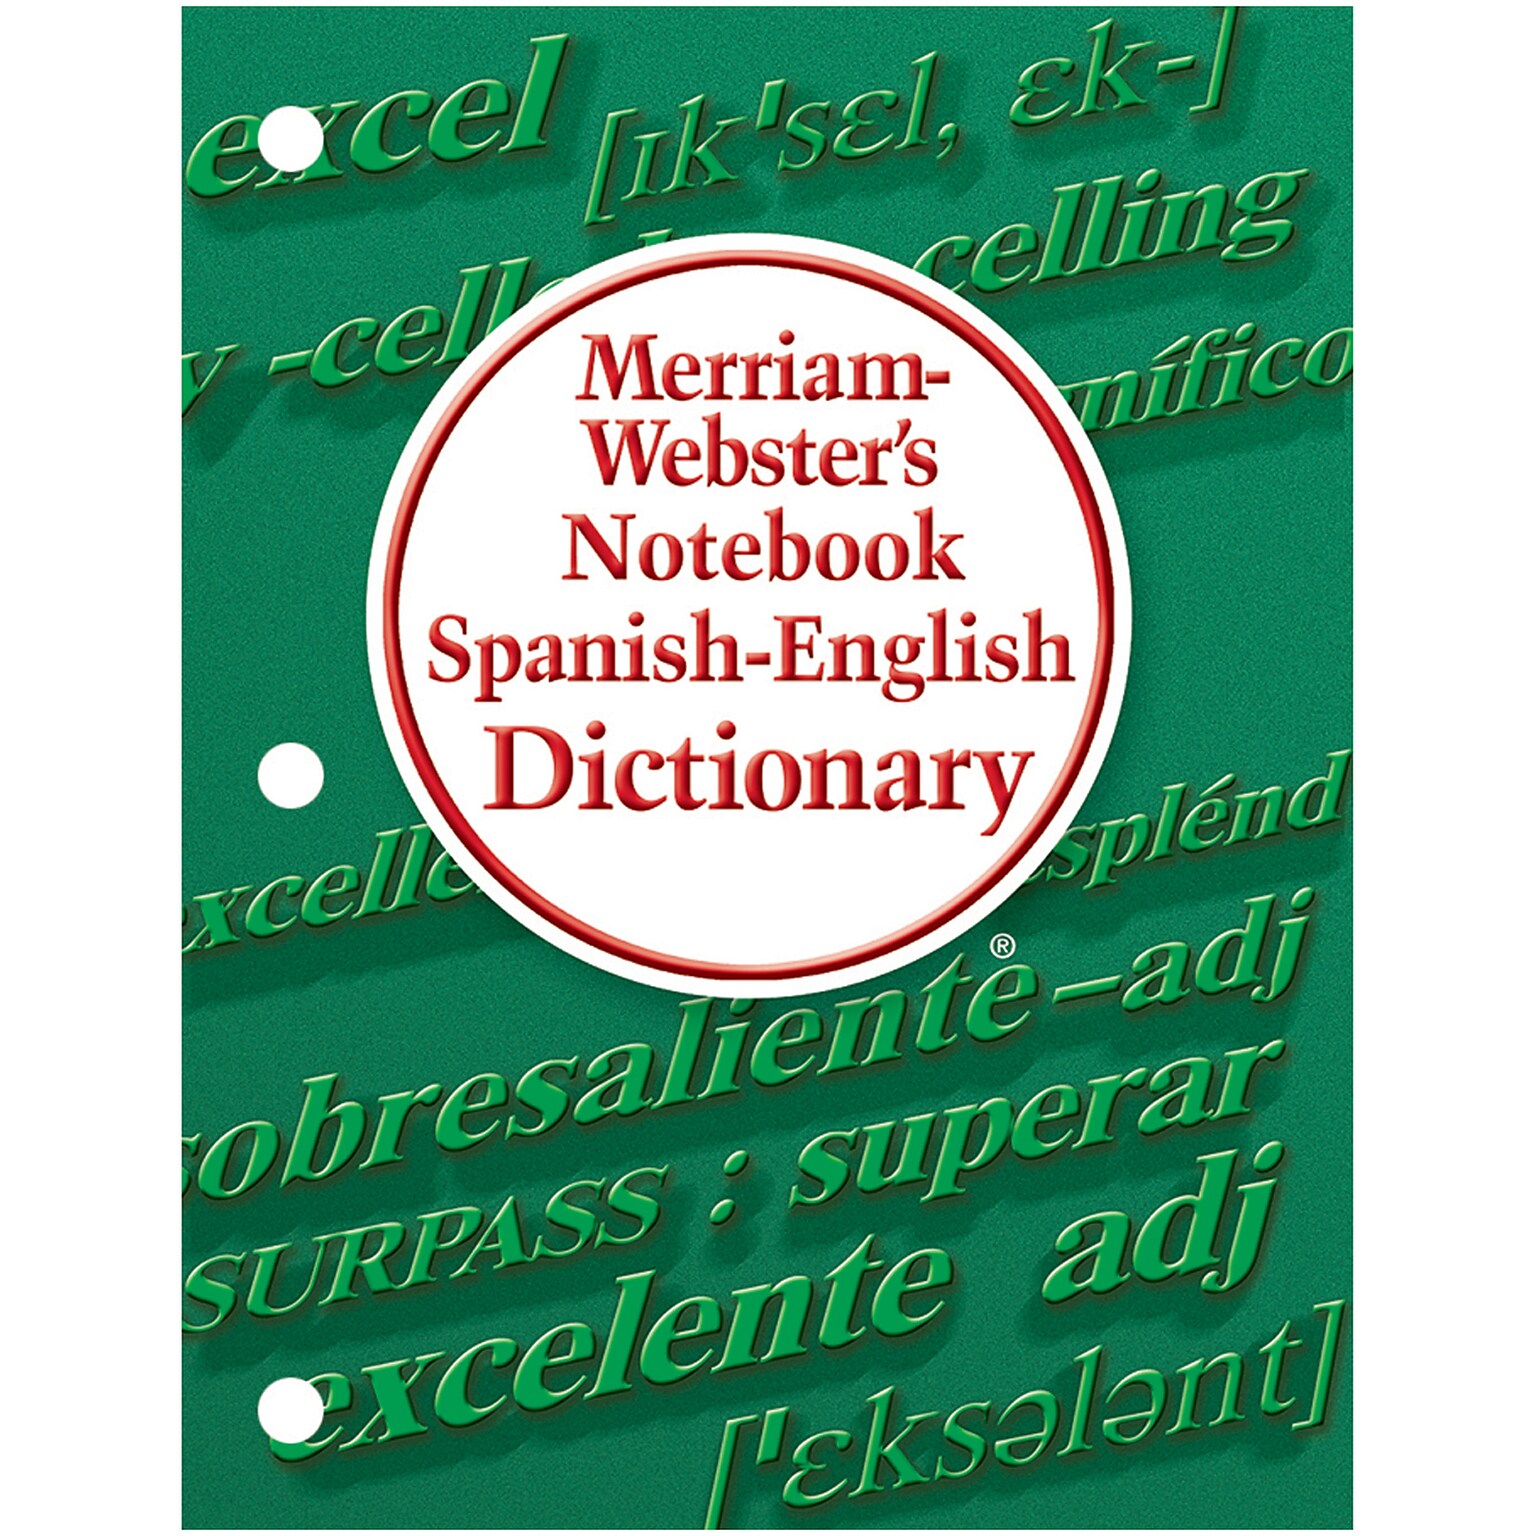 Merriam Websters Notebook Spanish-English Dictionary